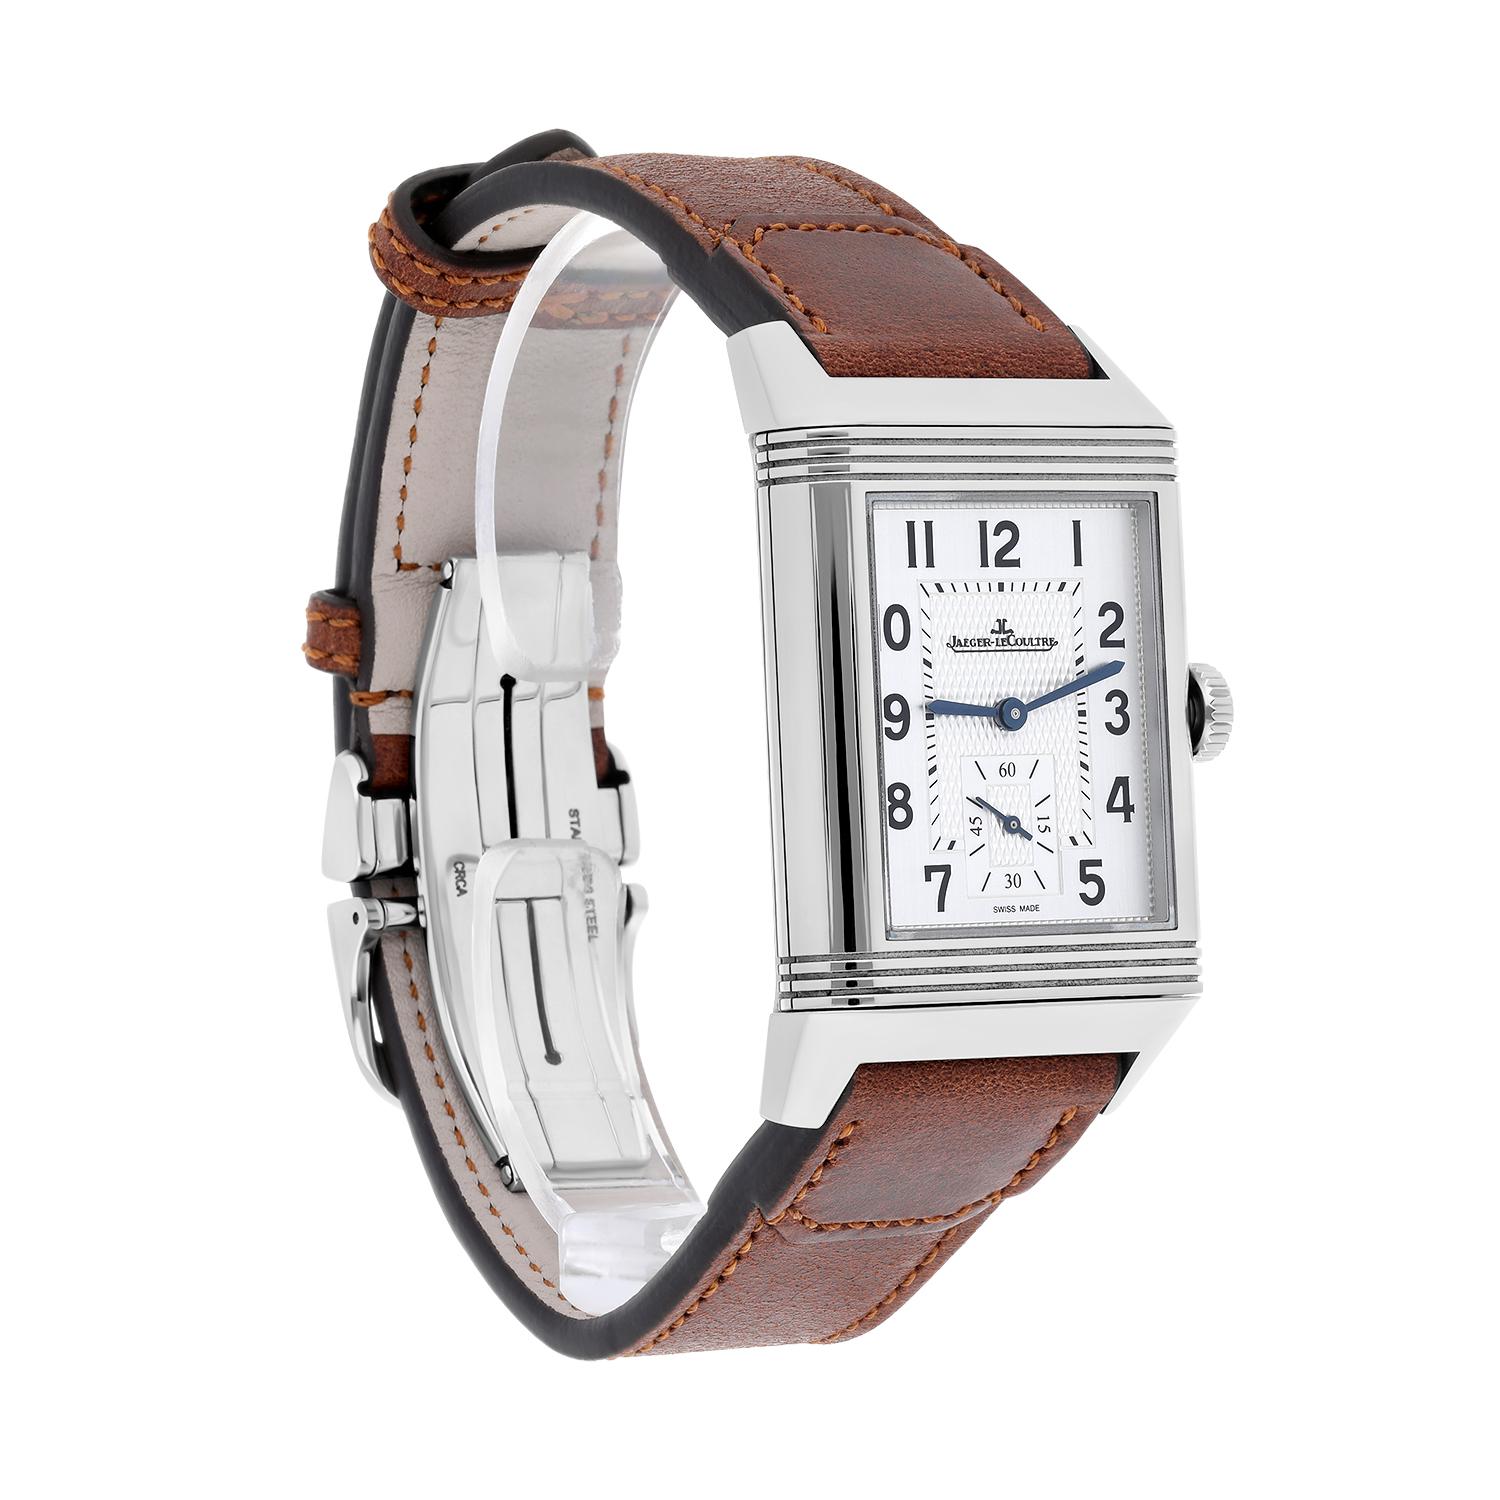 Modern Jaeger-LeCoultre Reverso Duoface Classic Duoface Small Seconds Watch (Q3848422) For Sale